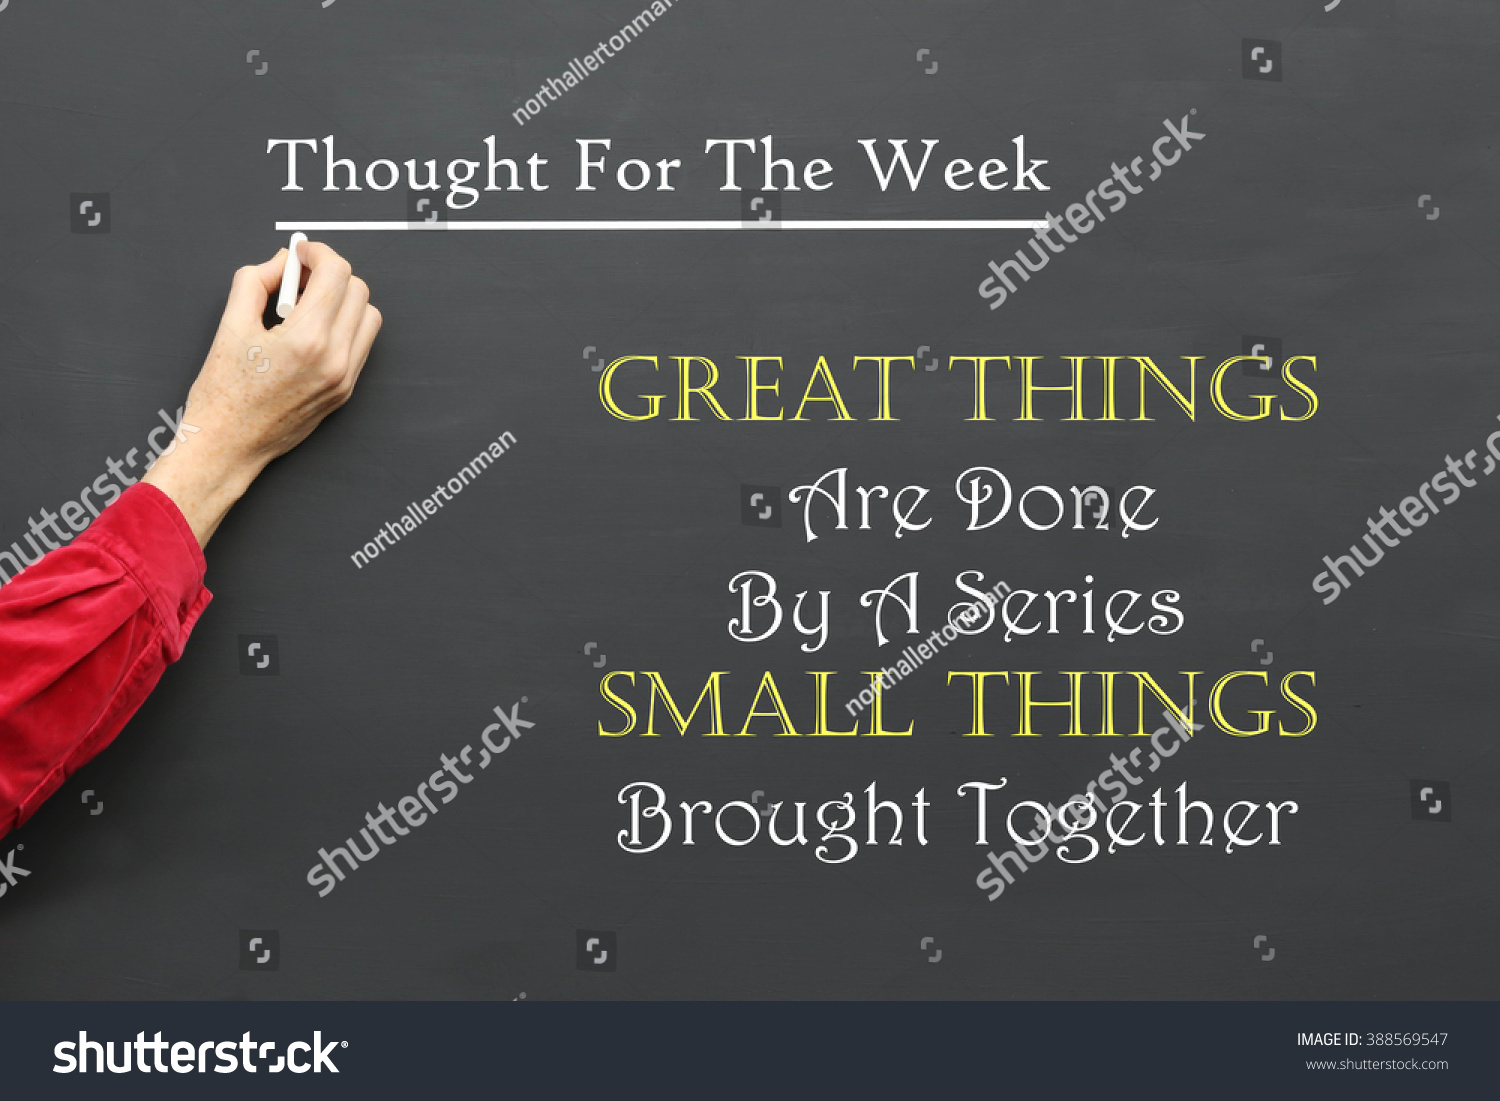 Inspirational Thought For The Day message of Great Things Are Done By A Series Of Small Things Brought Together written on a School Blackboard by the teacher #388569547